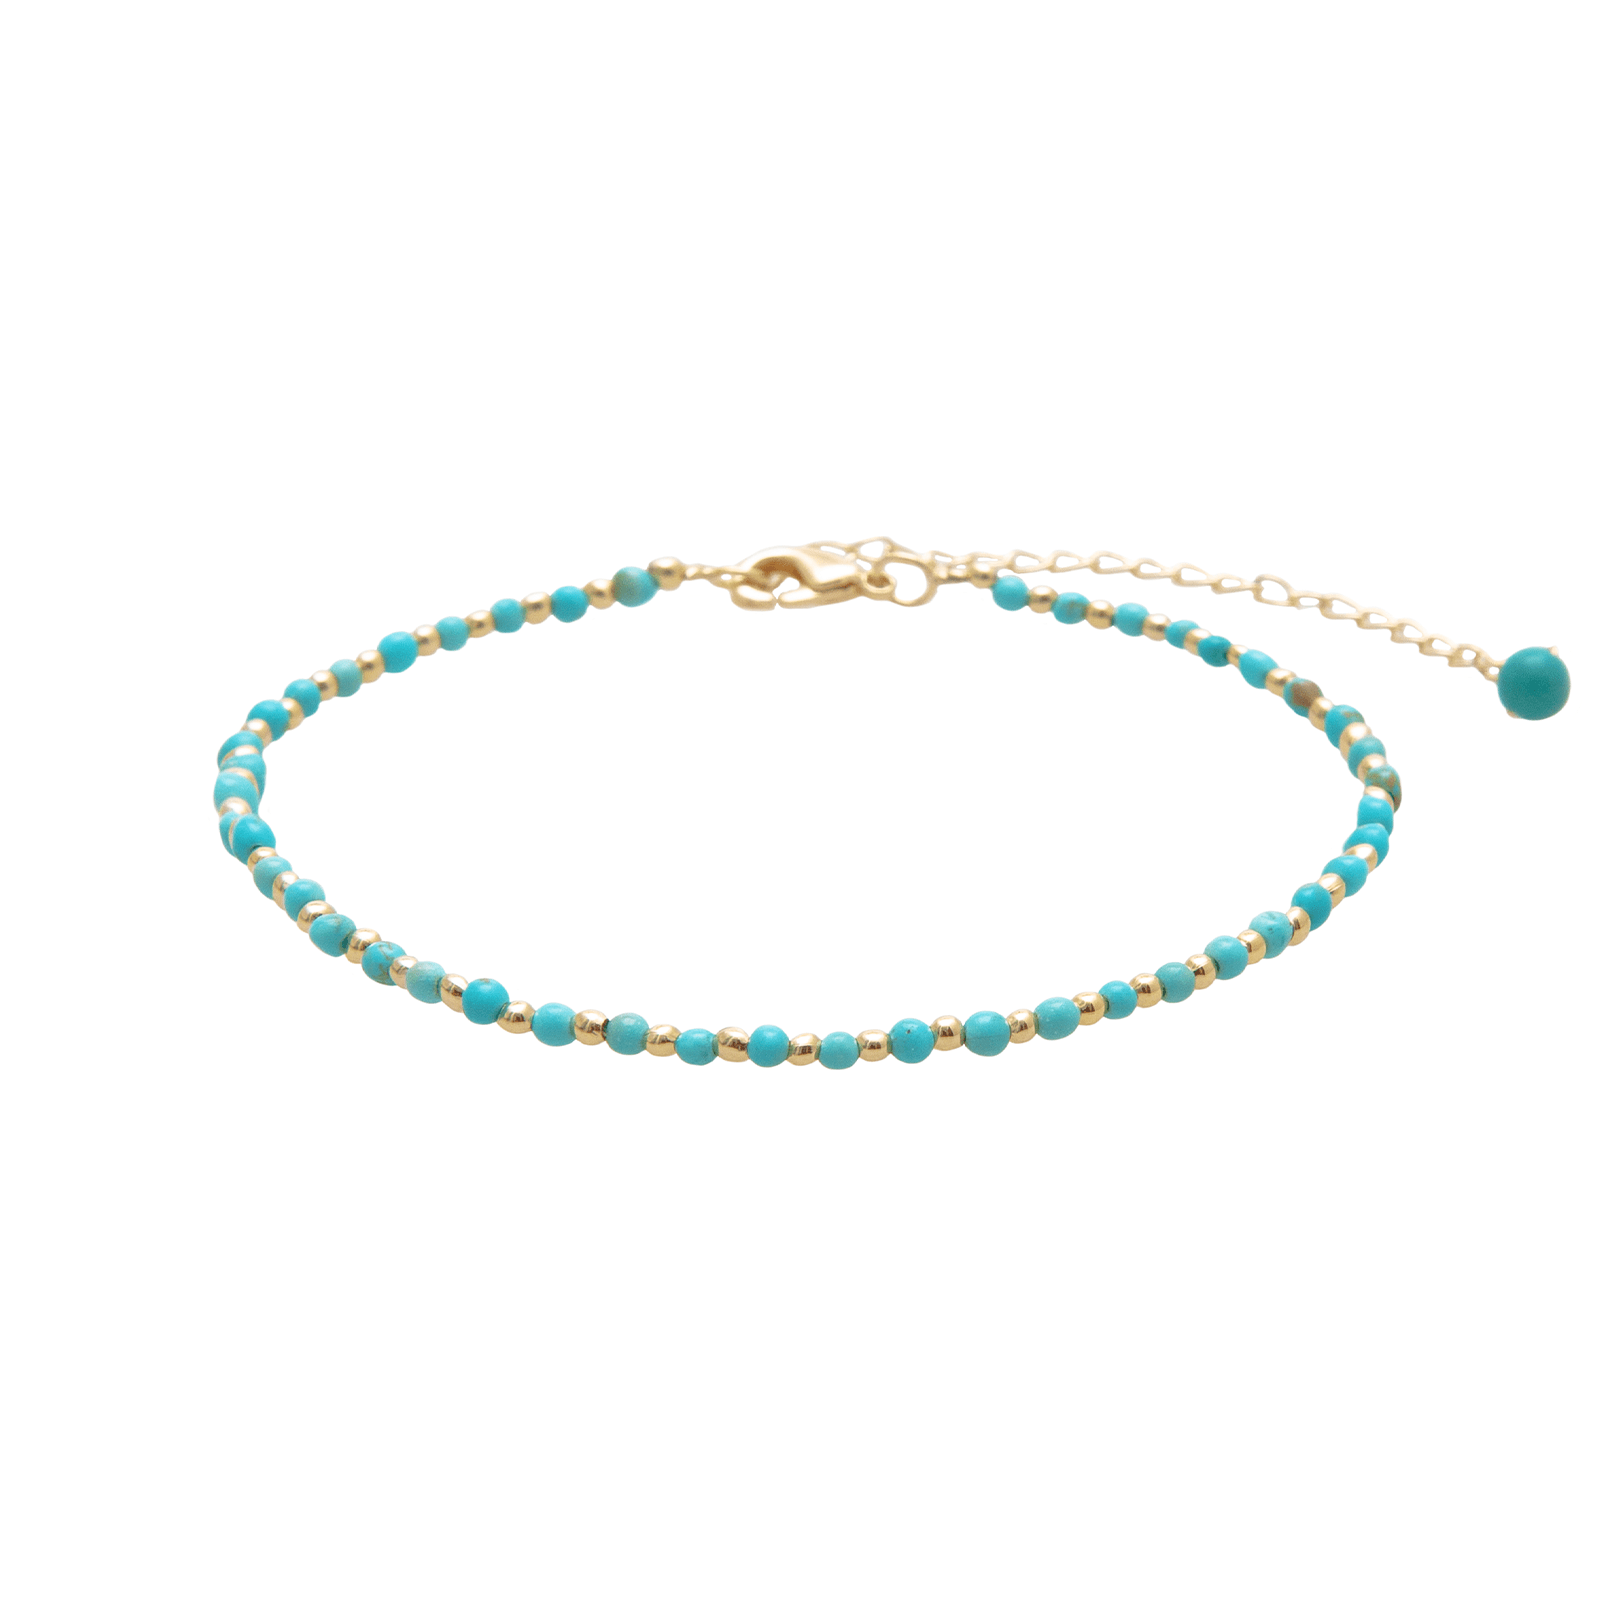 2mm turquoise stone and gold bead healing anklet with gold chain